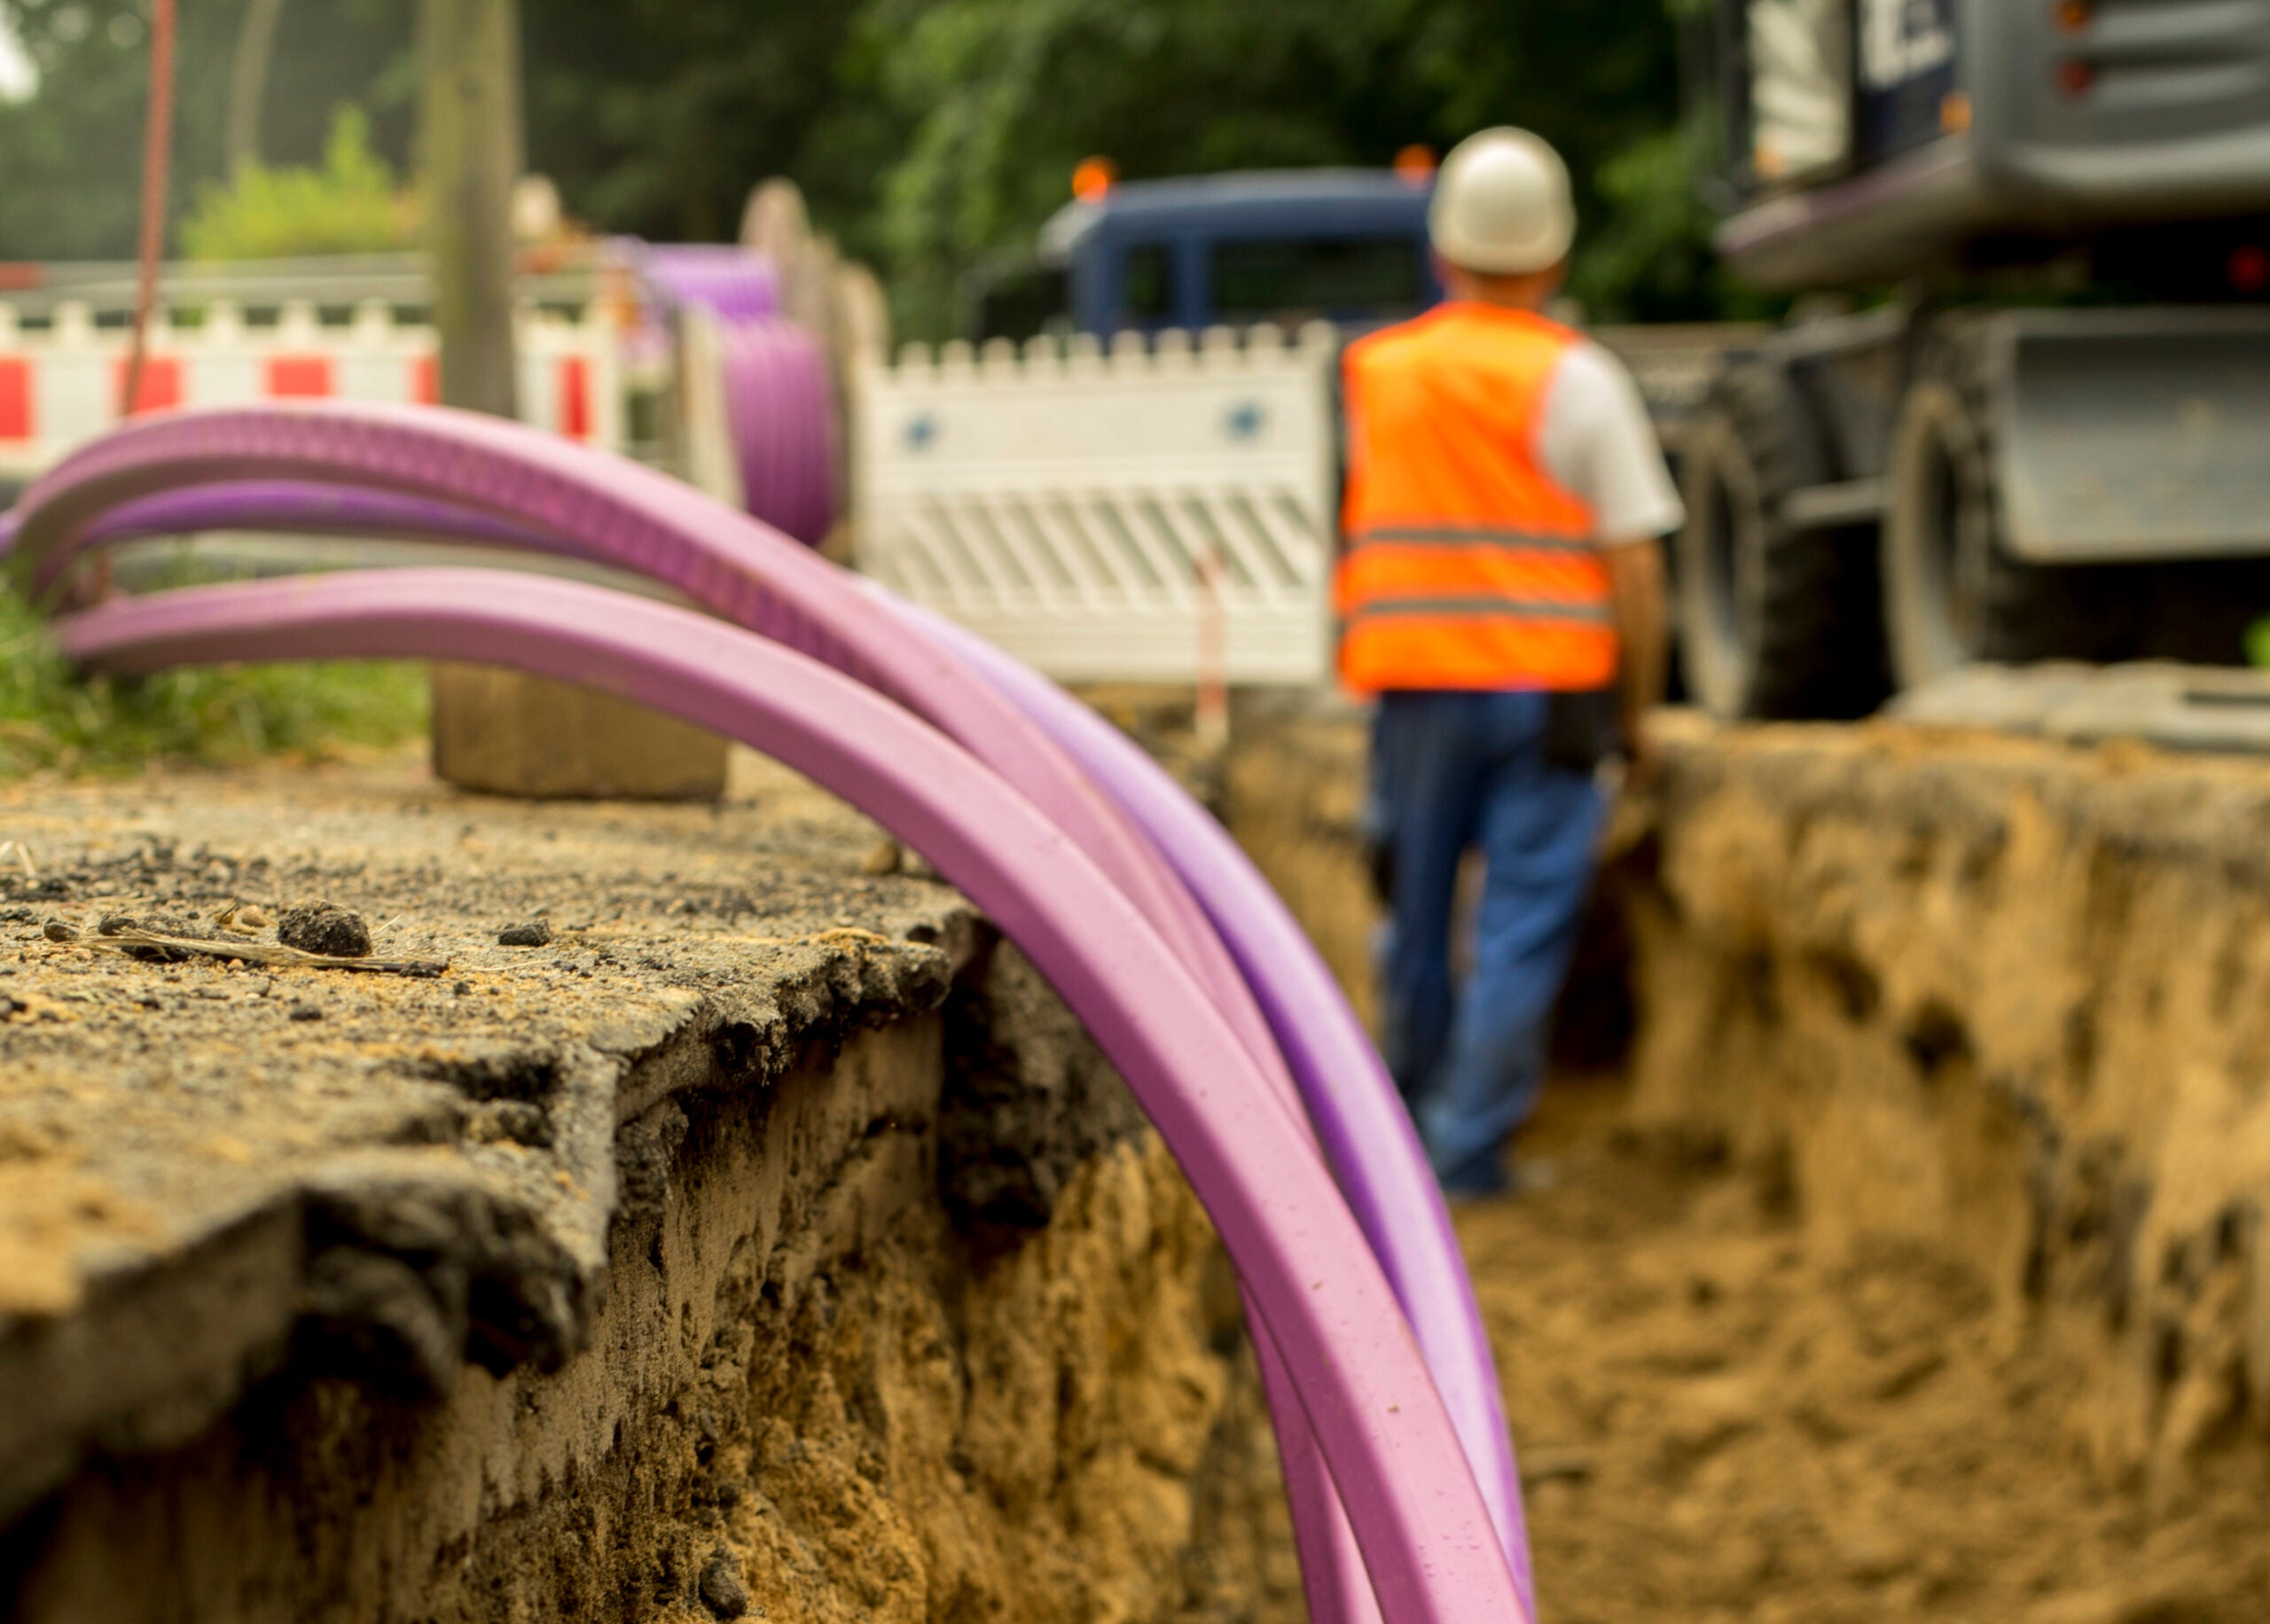 fiberglass cable being installed in the ground